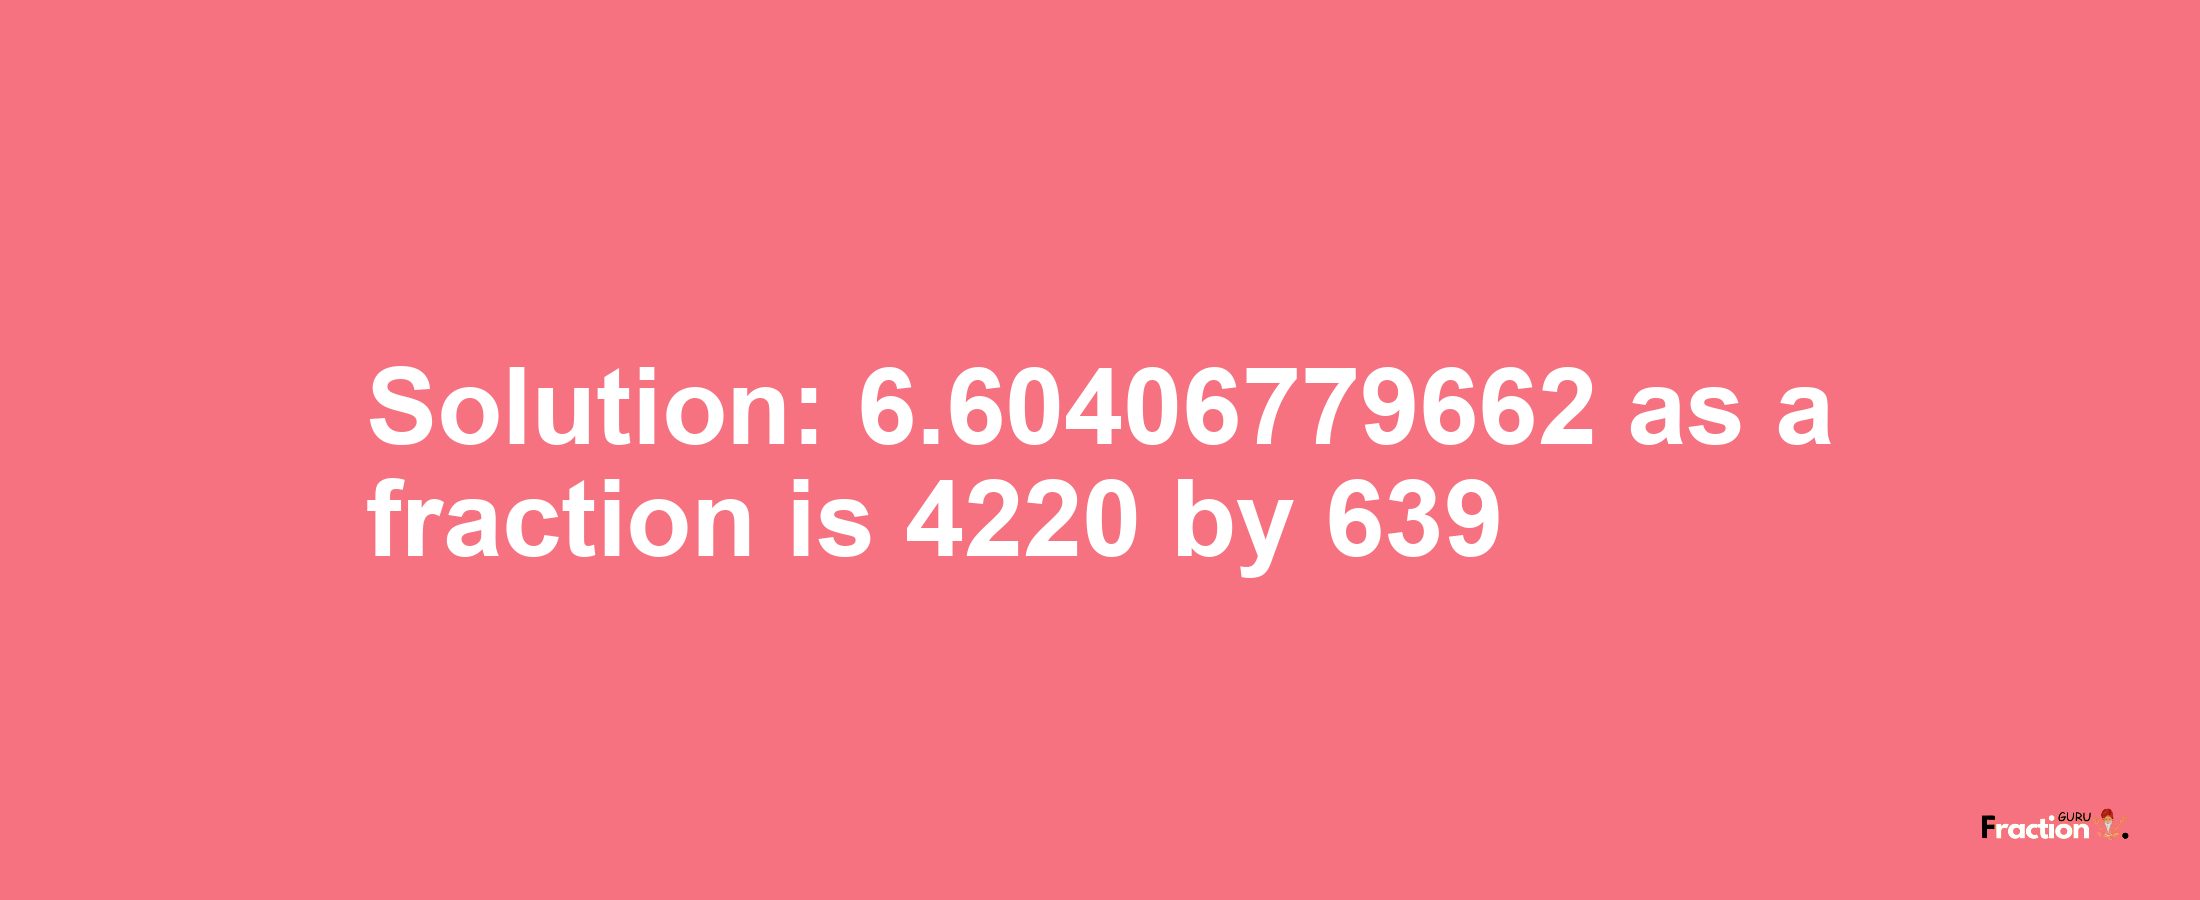 Solution:6.60406779662 as a fraction is 4220/639